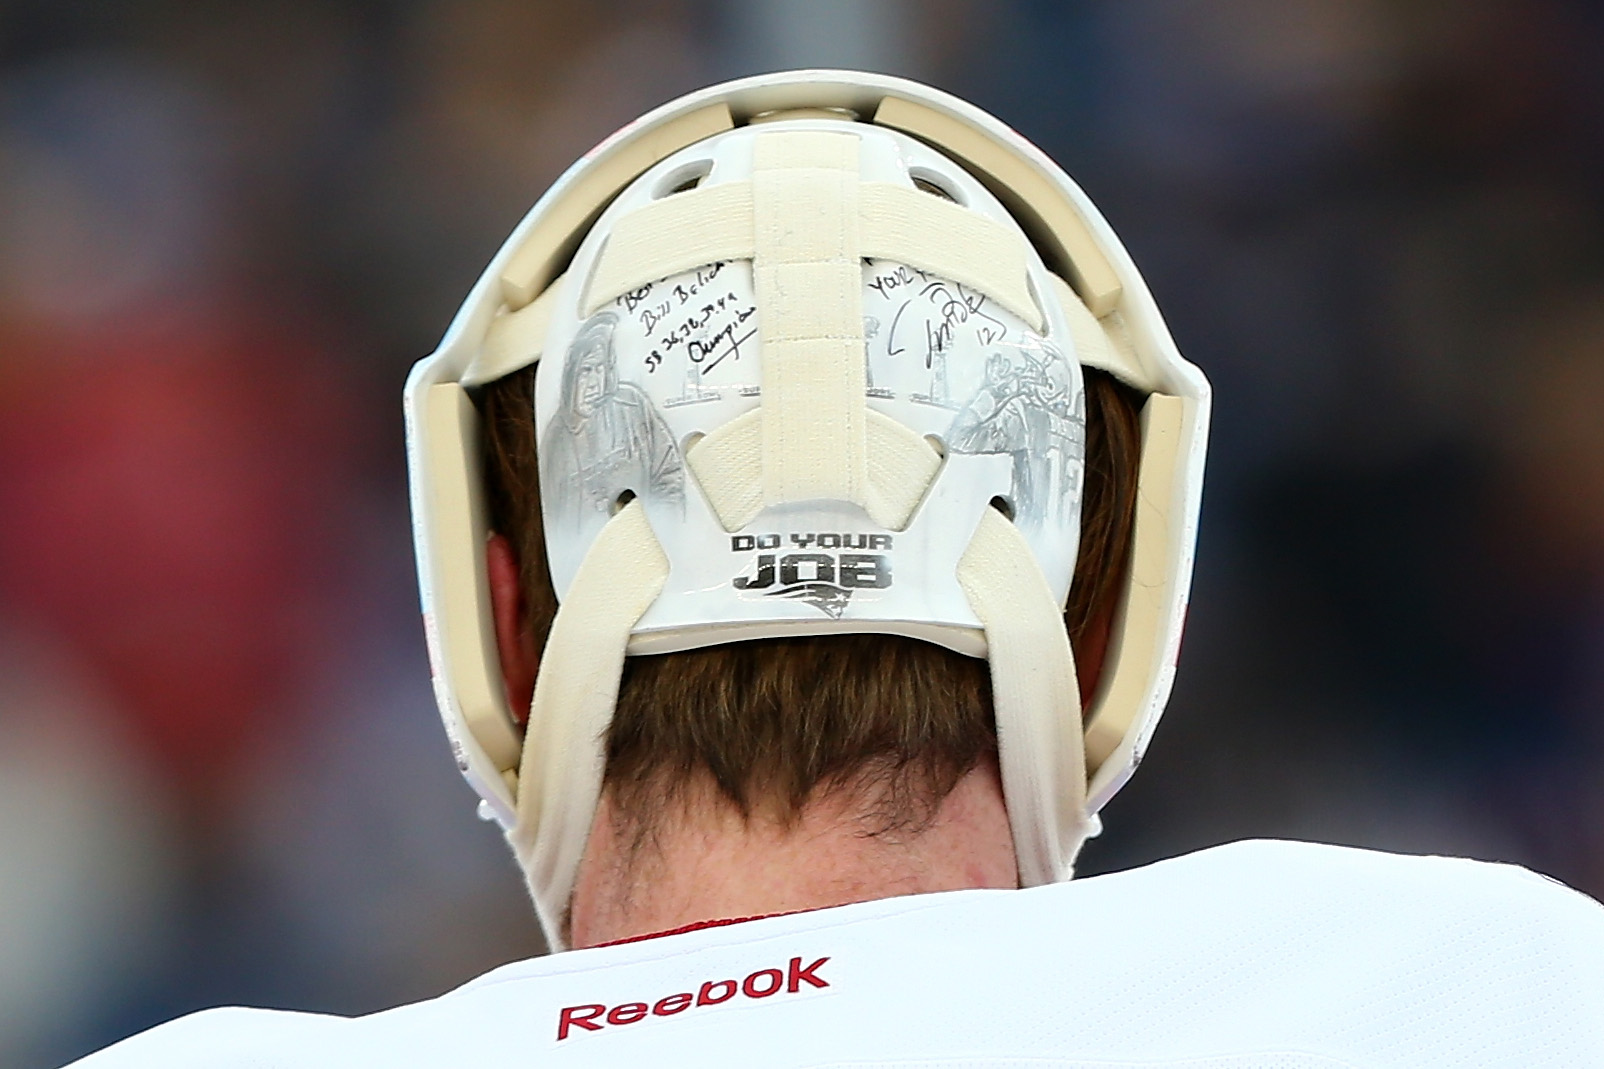 A detailed view of the helmet Montreal Canadiens goalie Mike Condon wore during the 2016 NHL Winter Classic at Gillette Stadium in Foxborough, Massachusetts, on Jan. 1, 2016. The helmet shows New England Patriots coach Bill Belichick and quarterback Tom Brady.